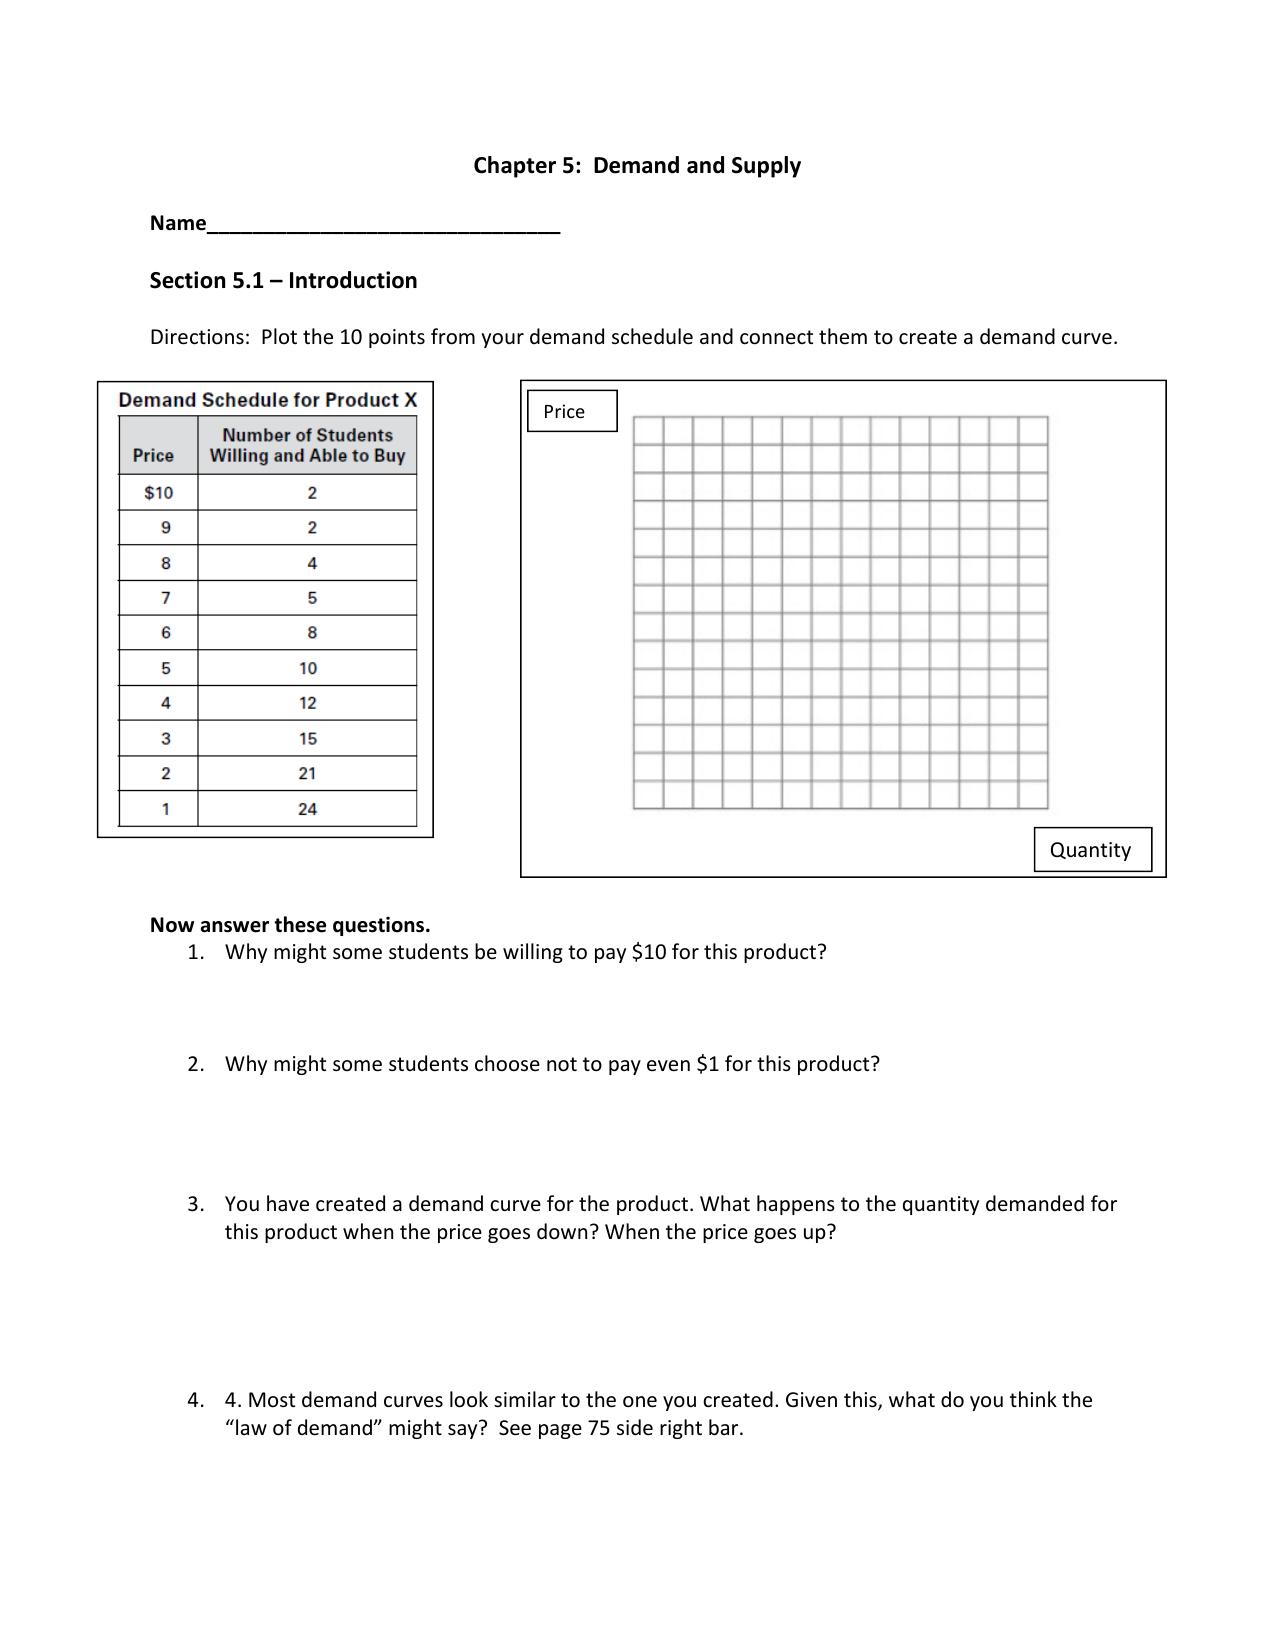 Chapter 5 Section 1 Understanding Supply Worksheet Answers db excel com